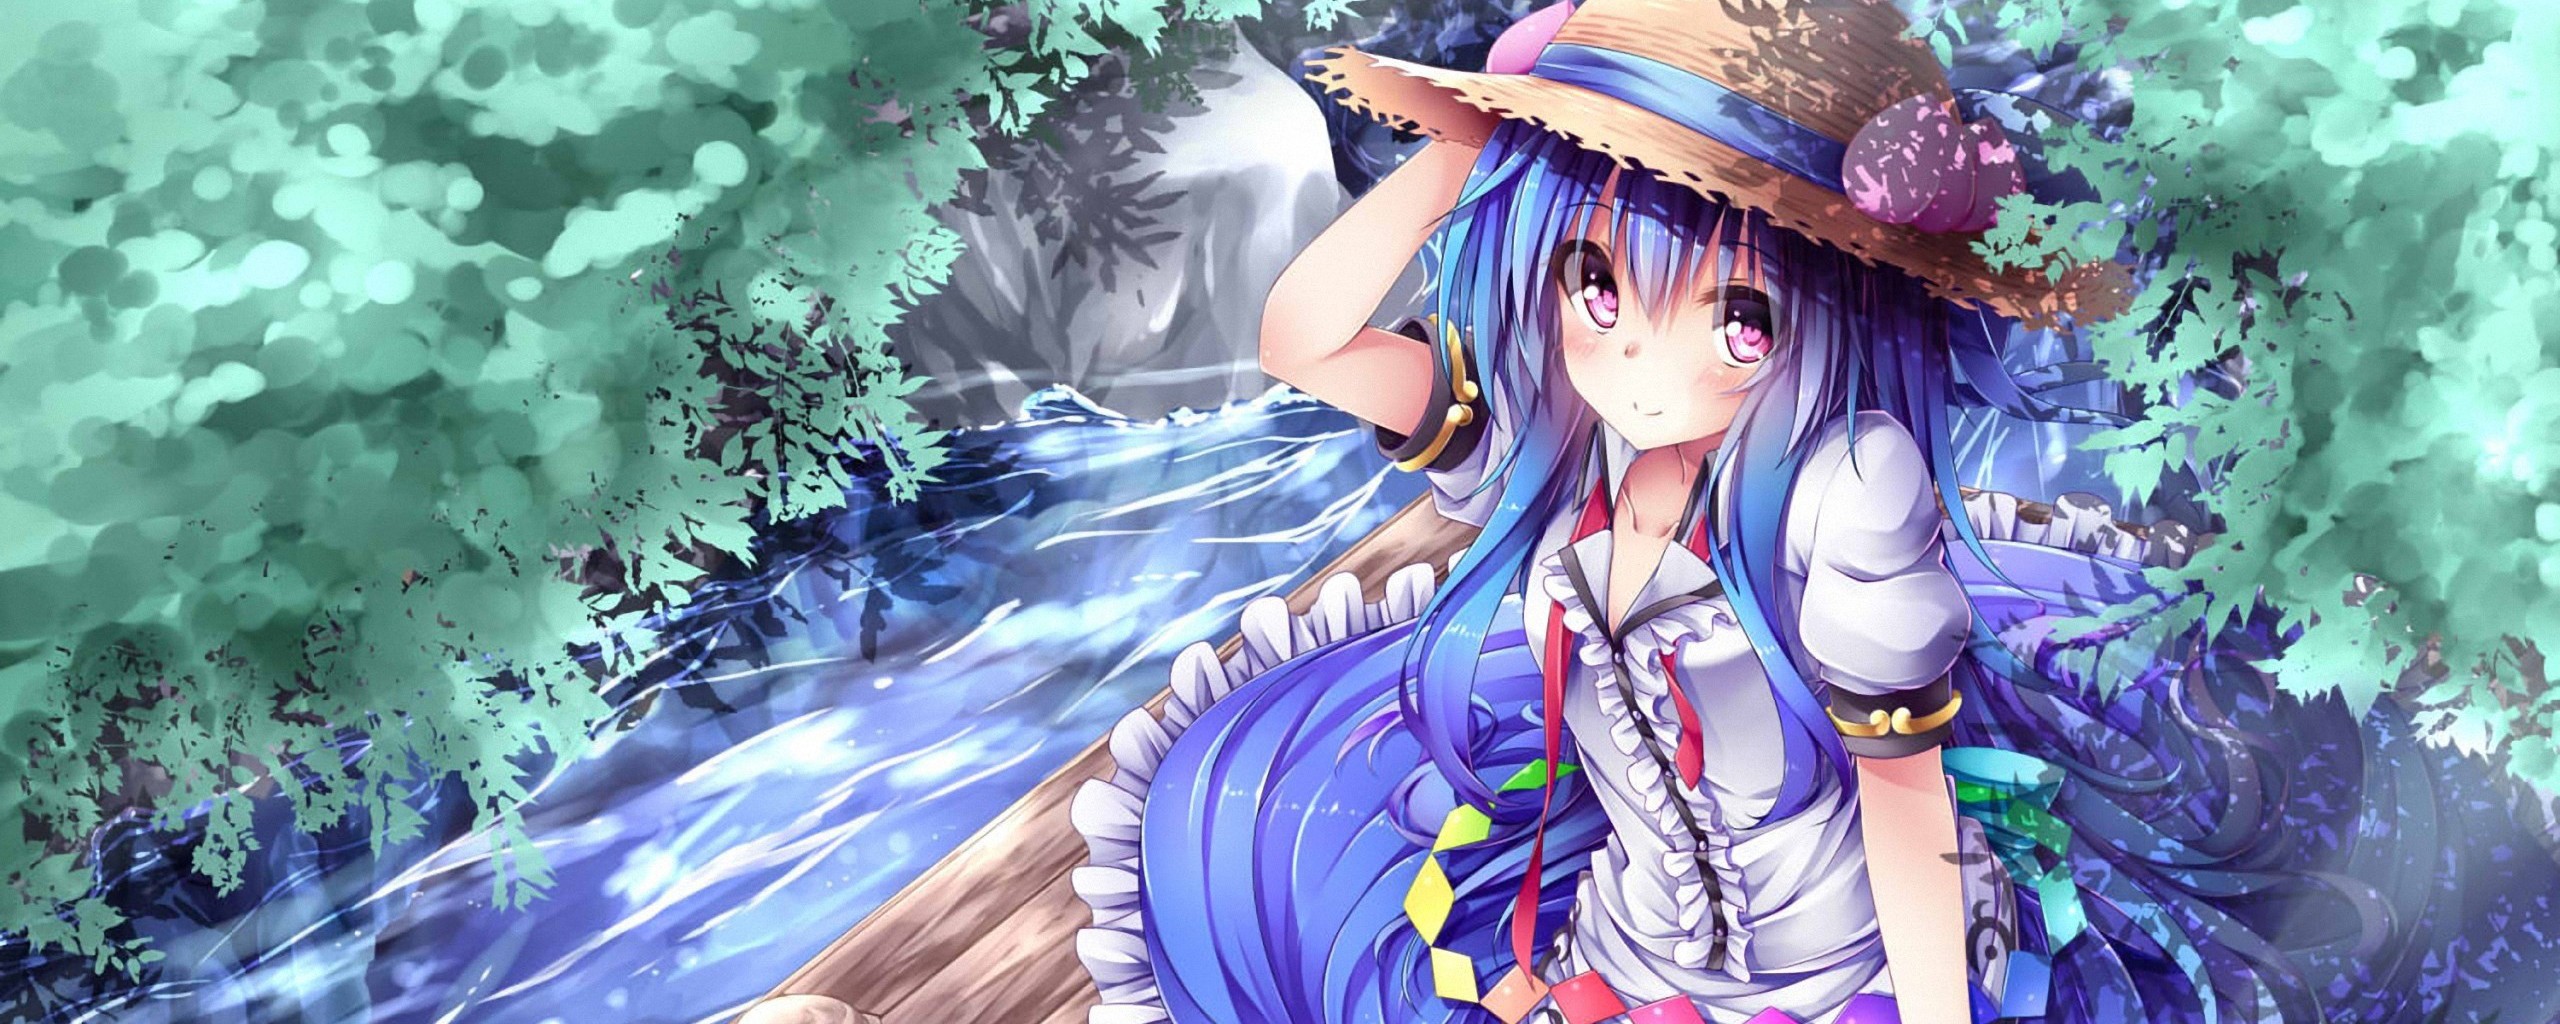 Anime 2560x1024 Hinanawi Tenshi Touhou anime girls anime hat women with hats looking at viewer dress blue hair women outdoors nature